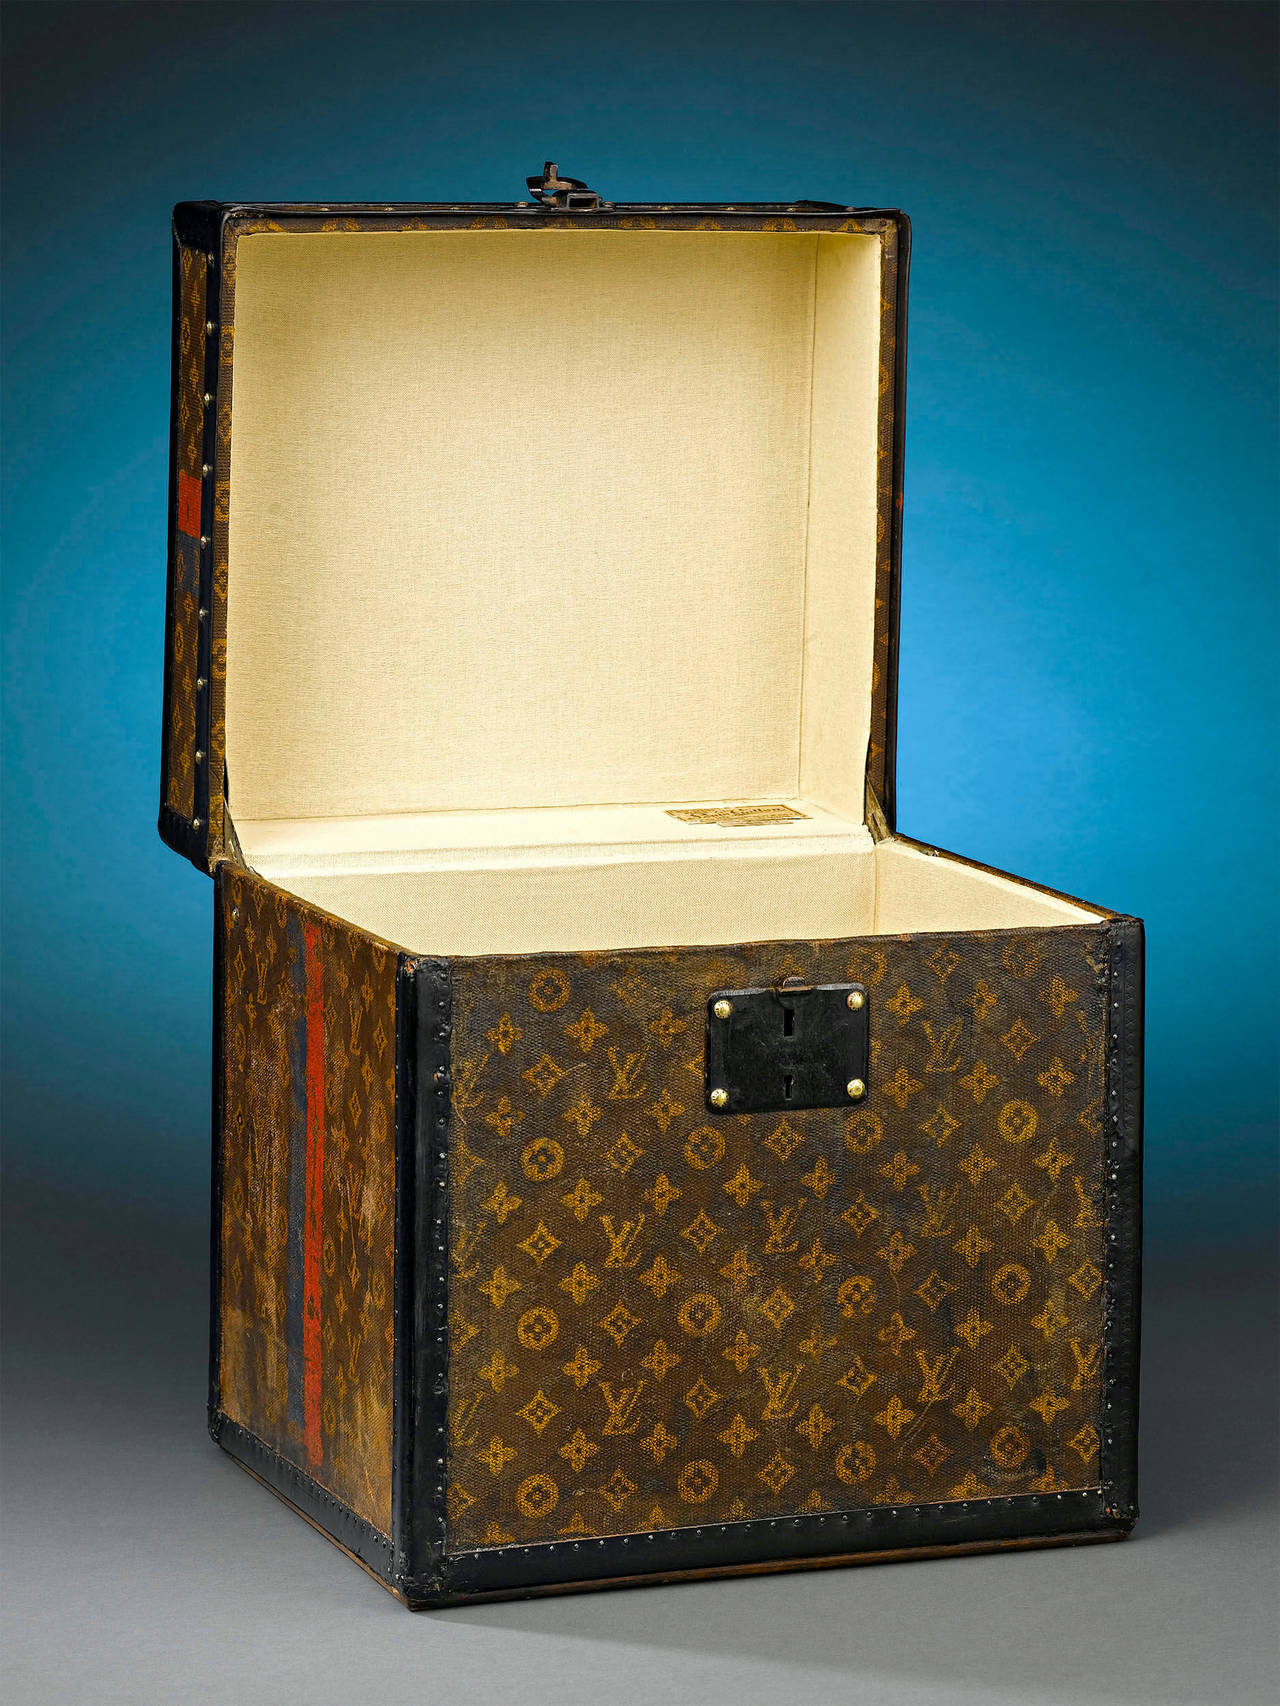 This rare antique Louis Vuitton hat box embodies the elegance and sophistication of a bygone era. Boasting the iconic “LV” monogram on its leather-upholstered frame, this standing box is designed for transporting one’s hats and accessories, and its